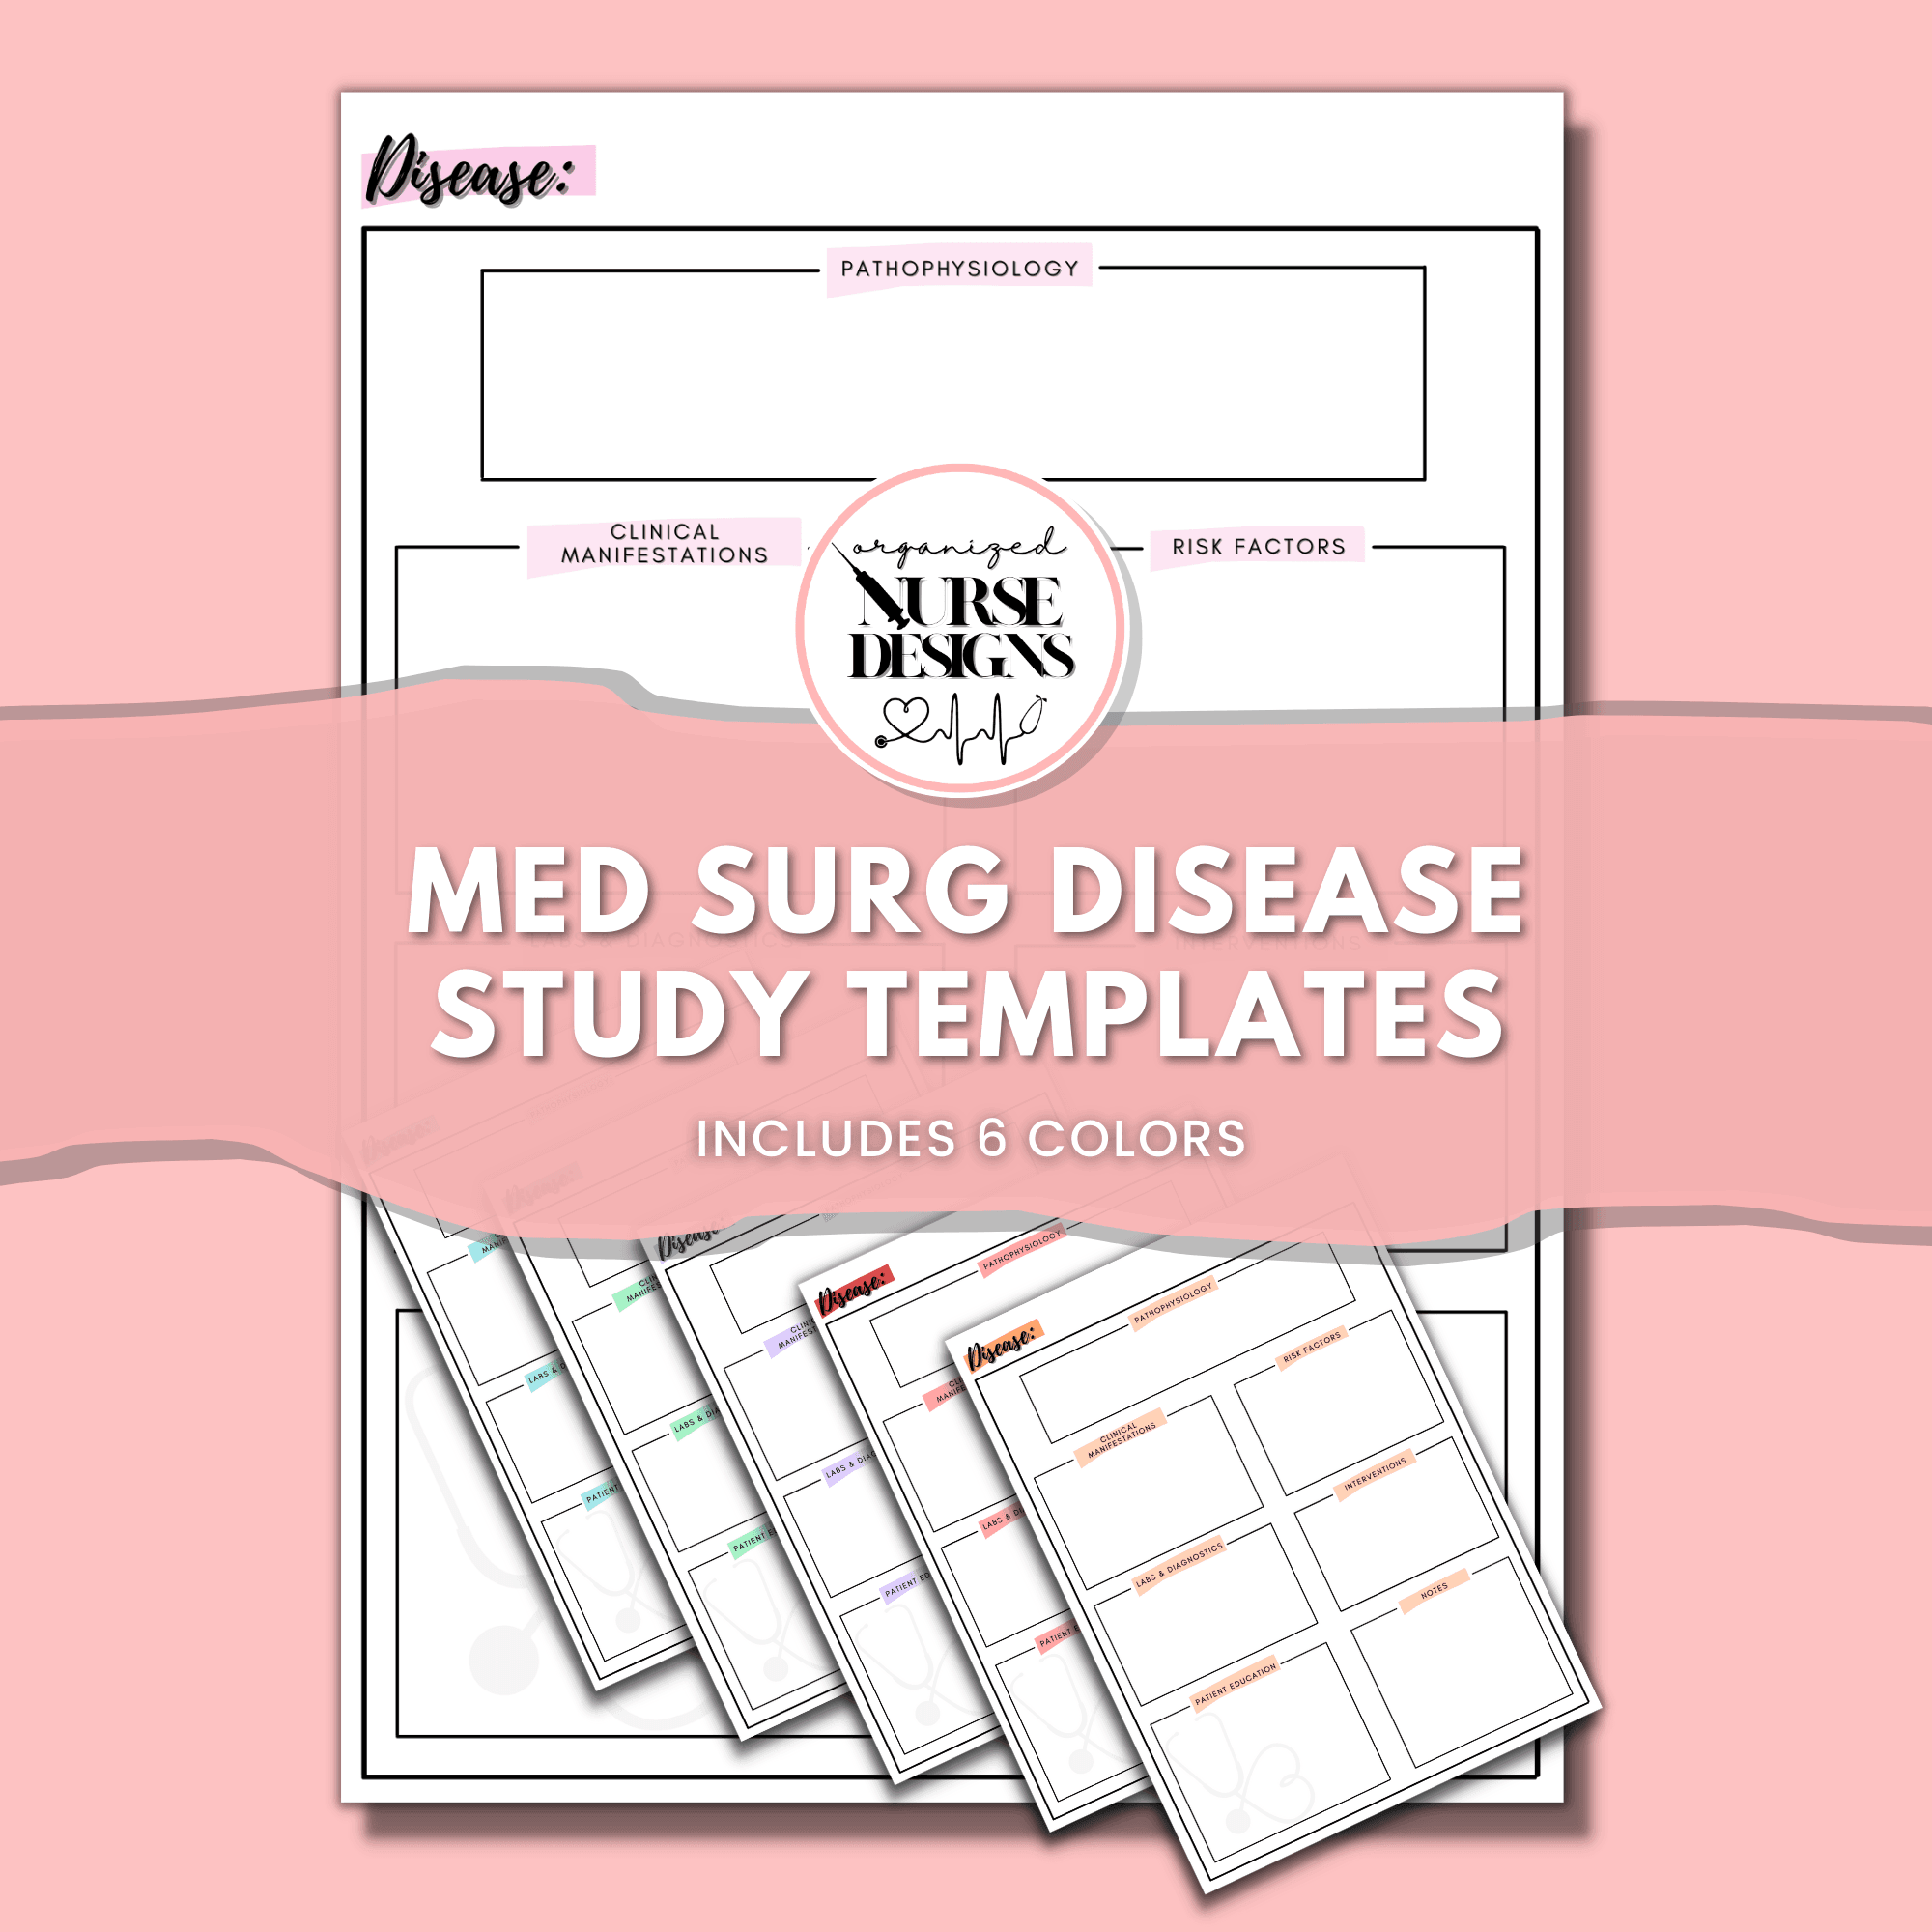 Med Surg Disease Study Templates for Nursing Students by OrganizedNurseDesigns